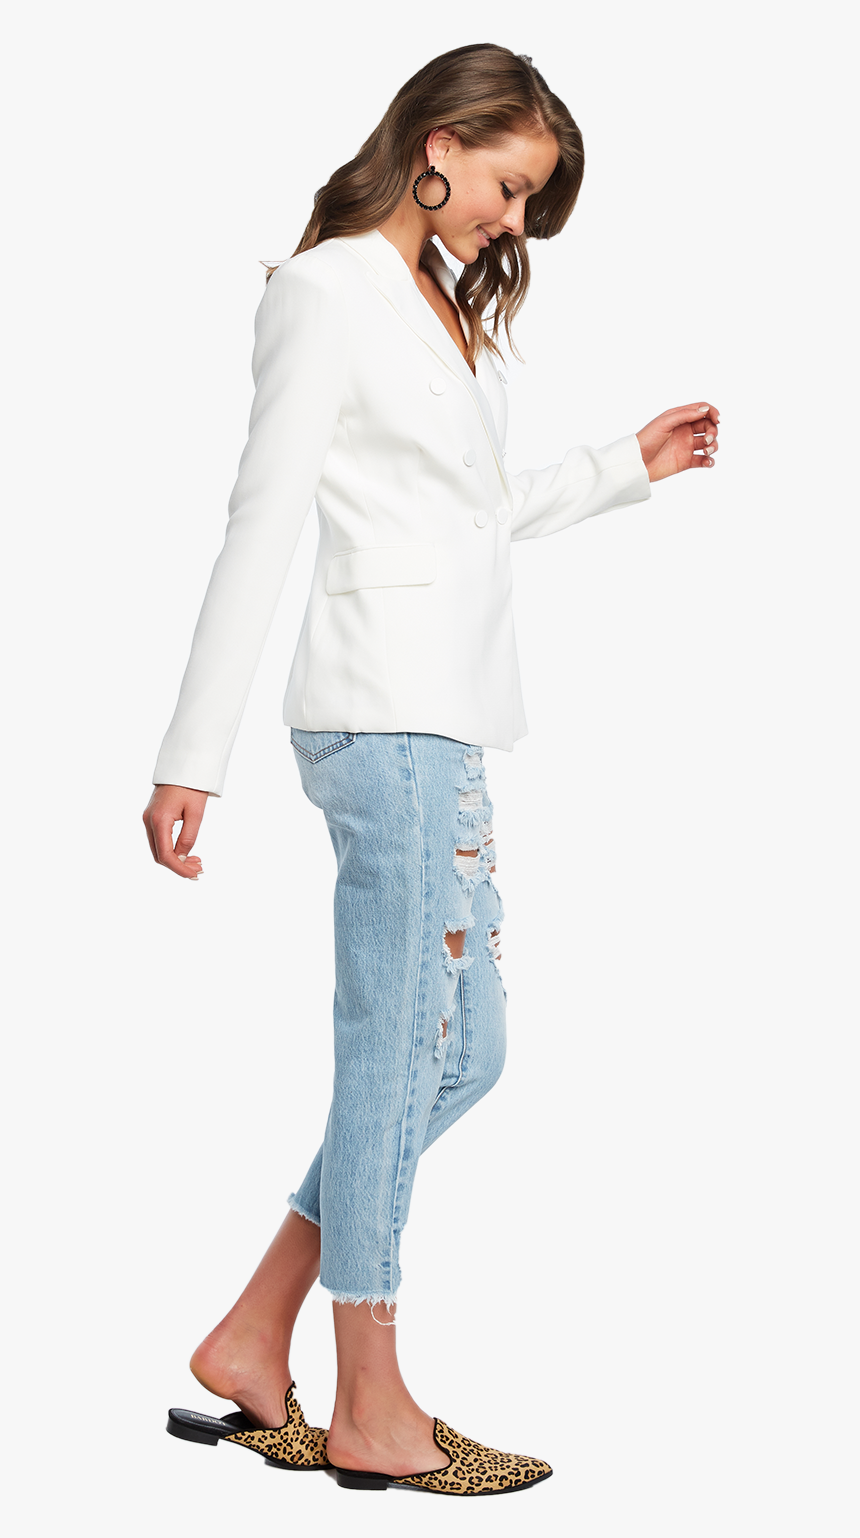 Tuxedo Jacket In Colour Bright White - Girl, HD Png Download, Free Download